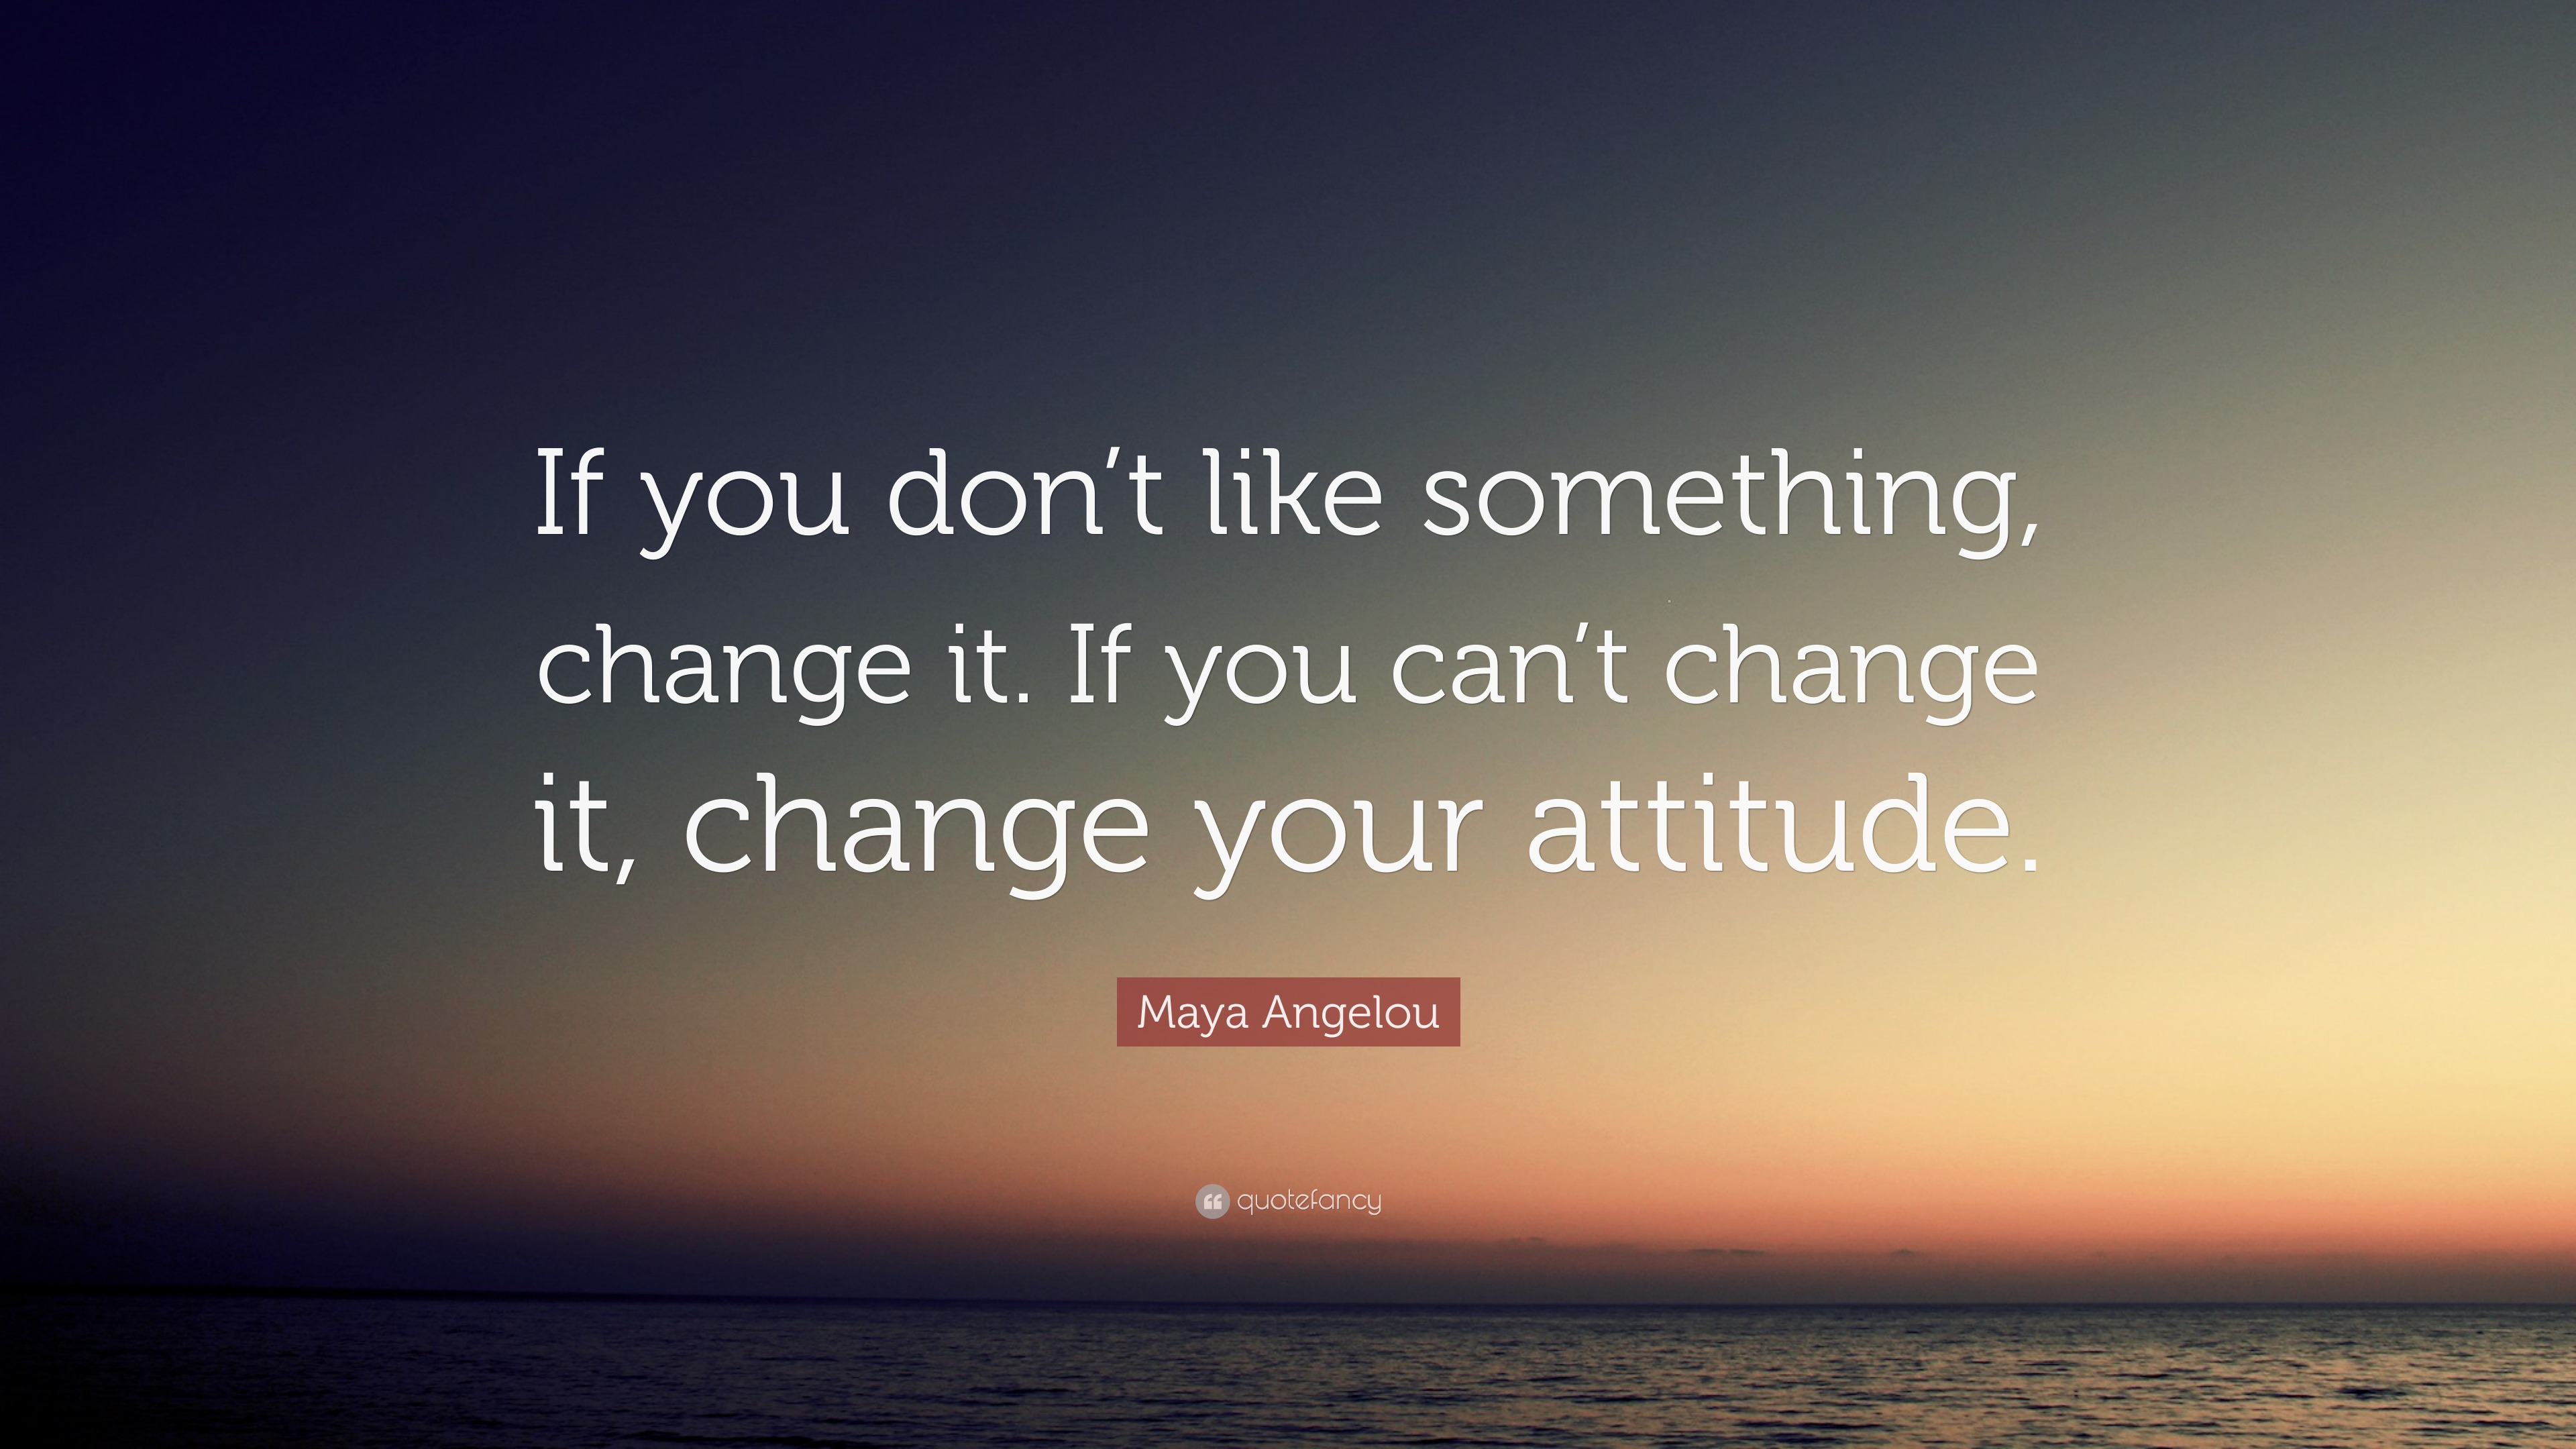 Maya Angelou Quote: “If you don’t like something, change it. If you can